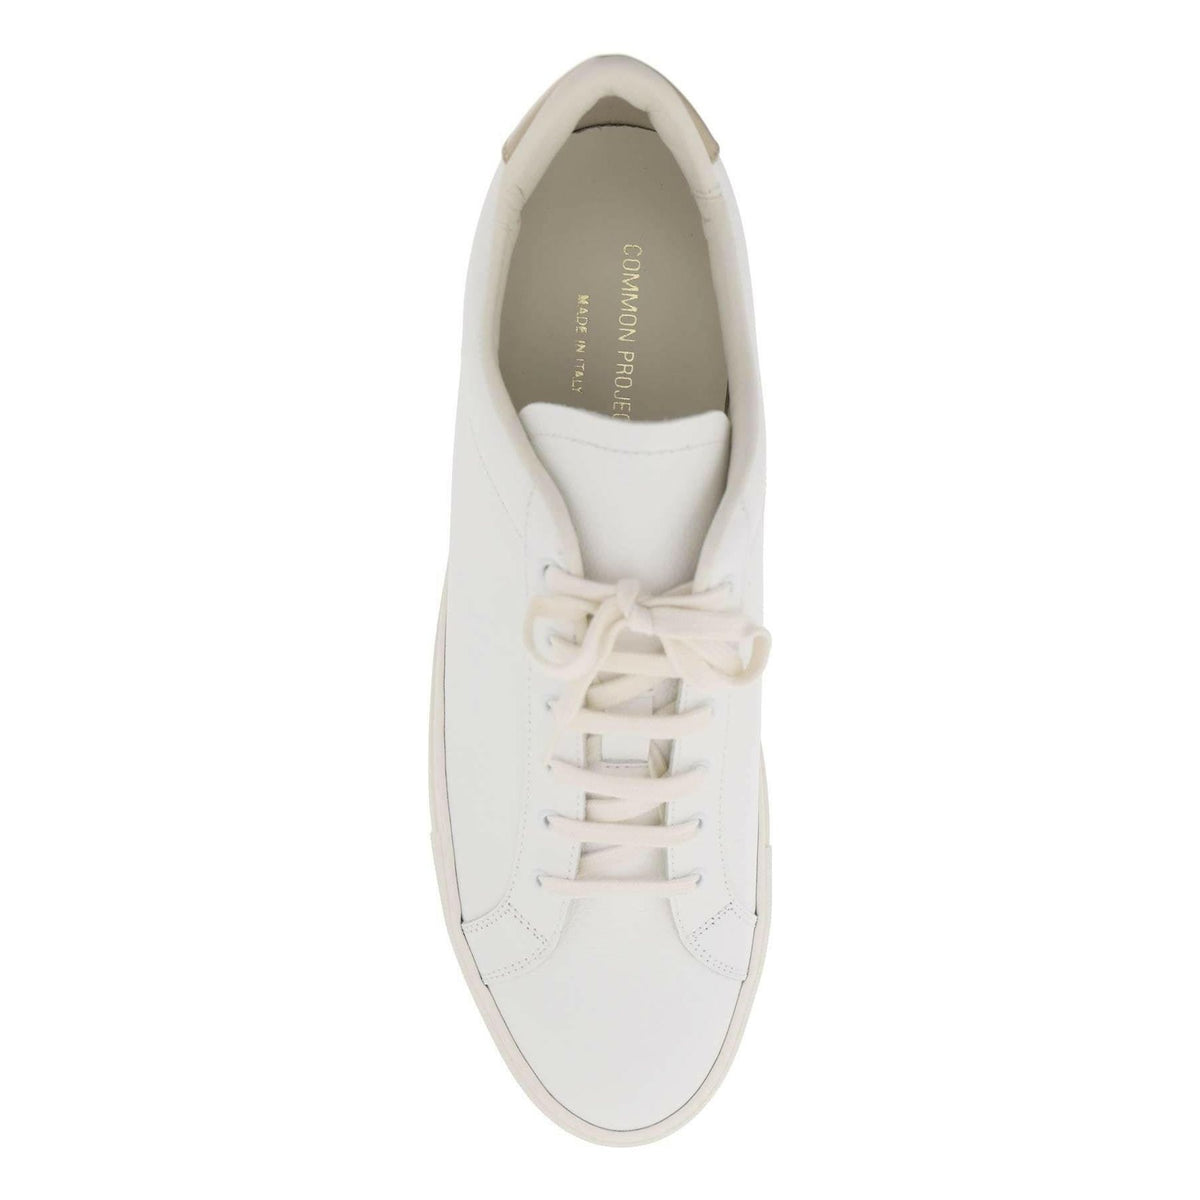 COMMON PROJECTS - White Tan Retro Low-Top Leather Sneakers - JOHN JULIA